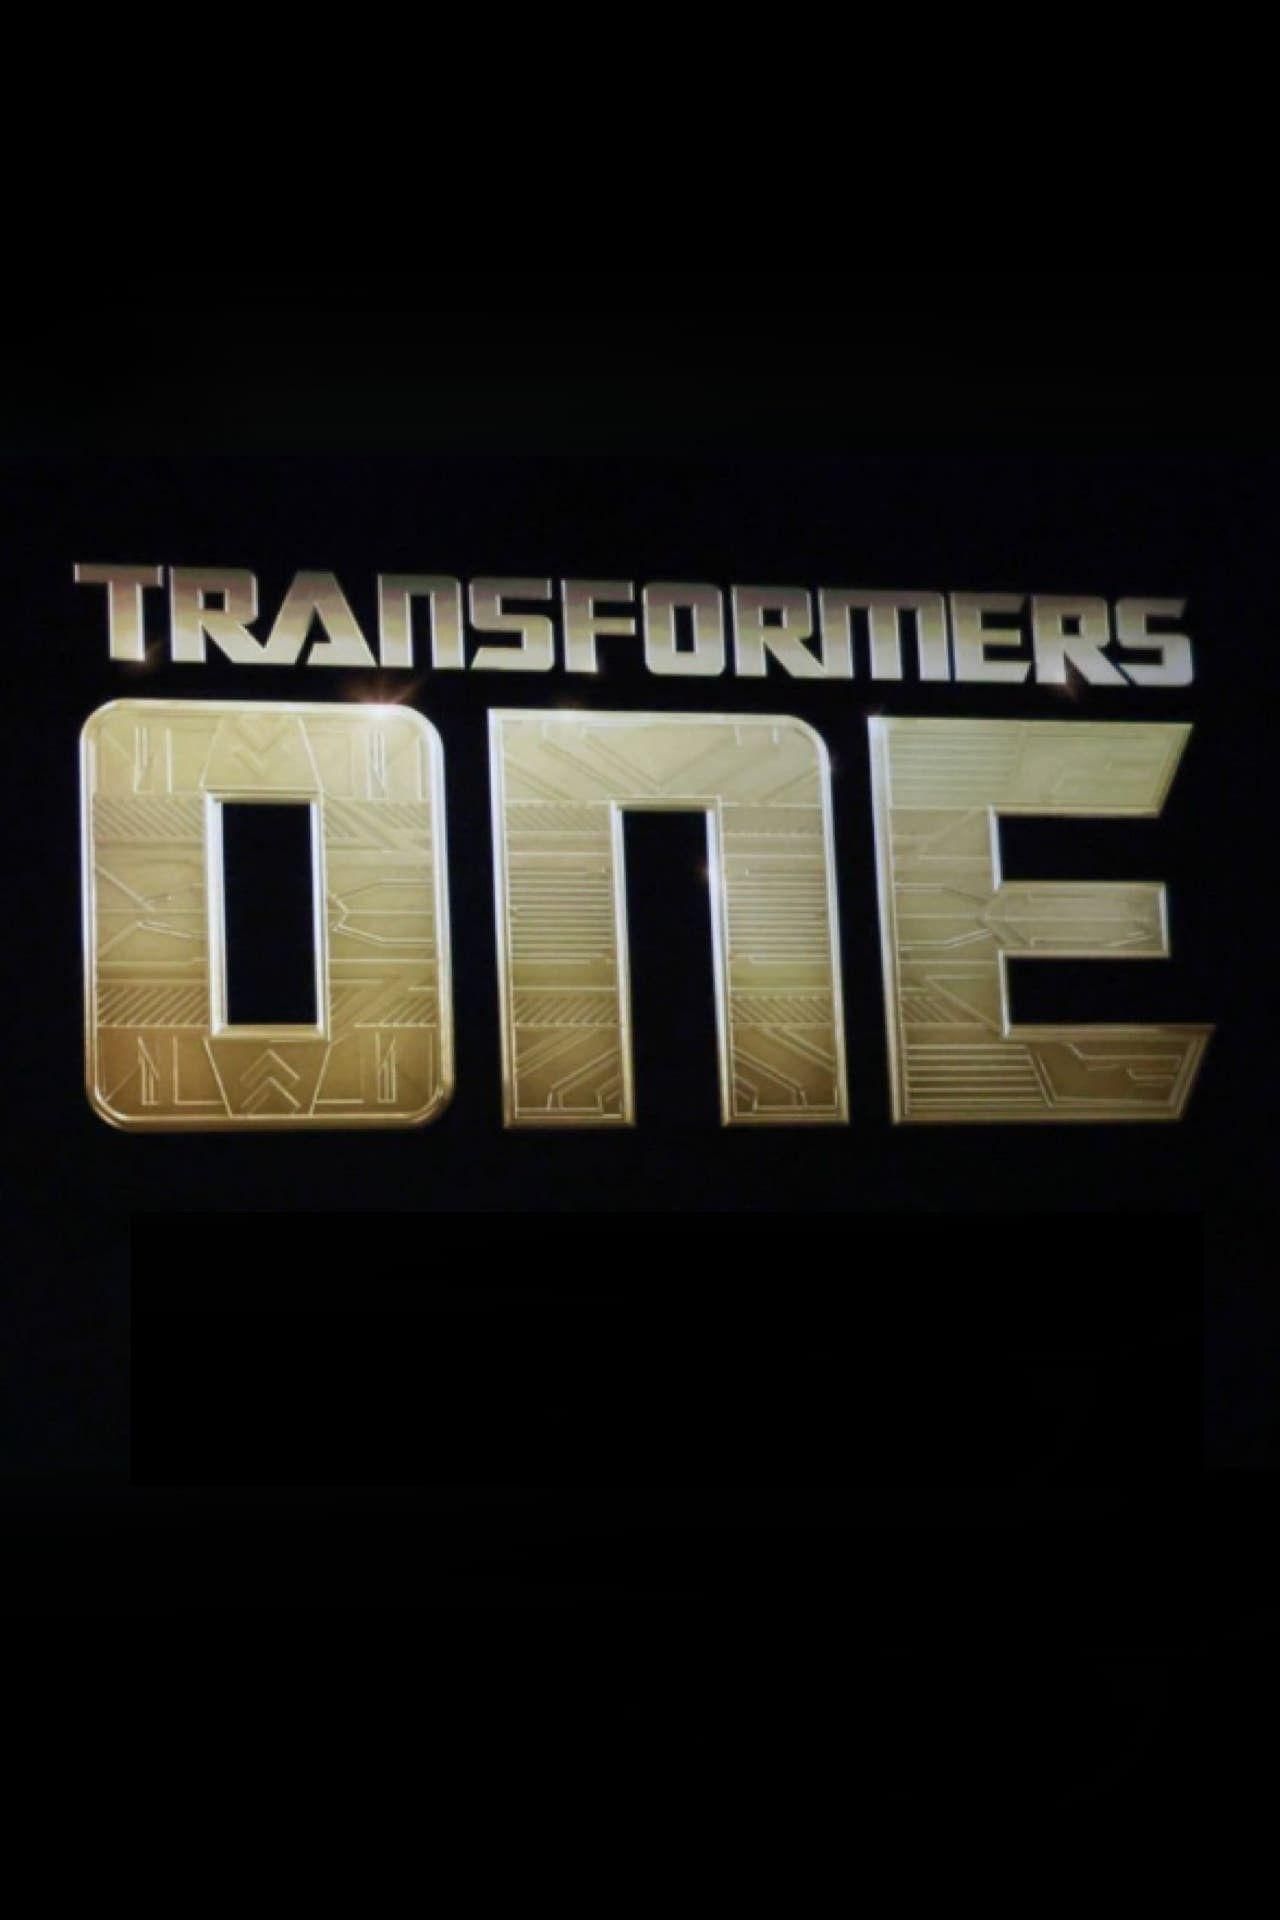 Teaser poster for “Transformers One”